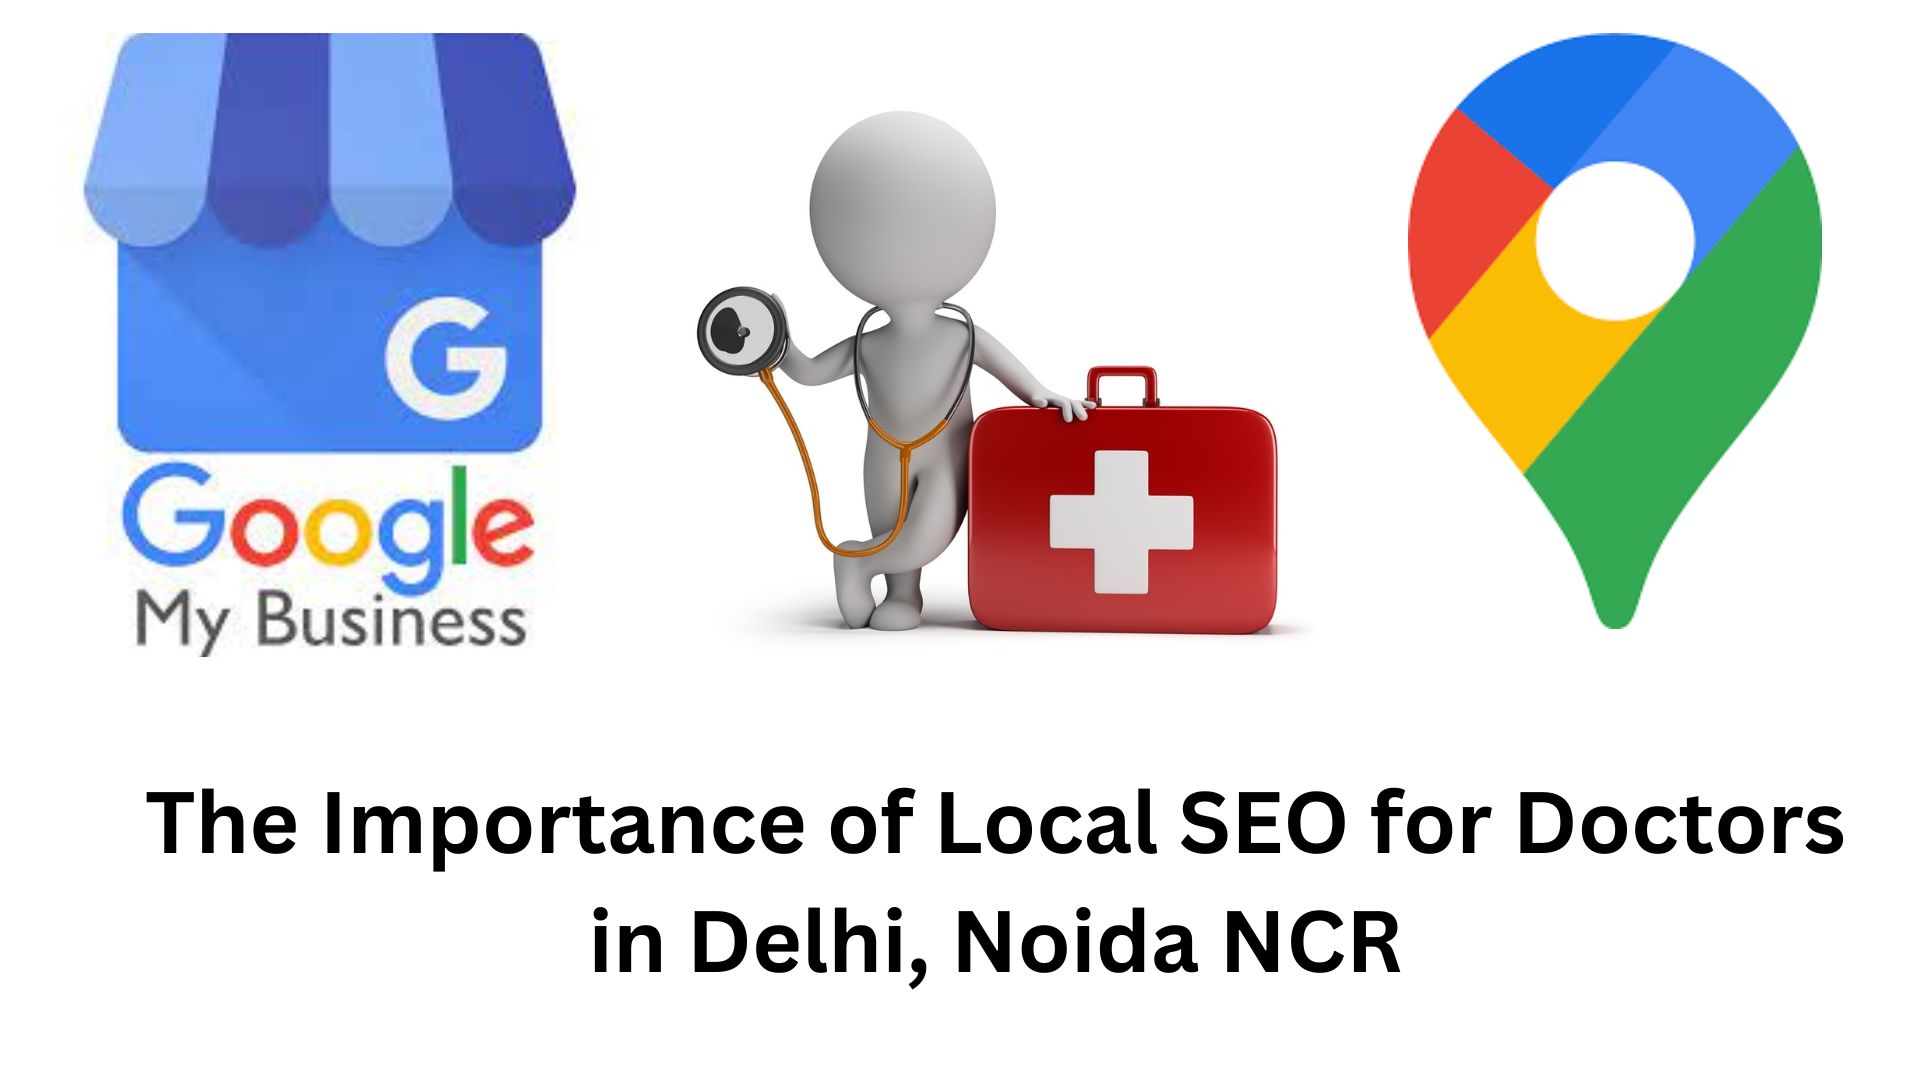 The Importance of Local SEO for Doctors in Delhi, Noida NCR